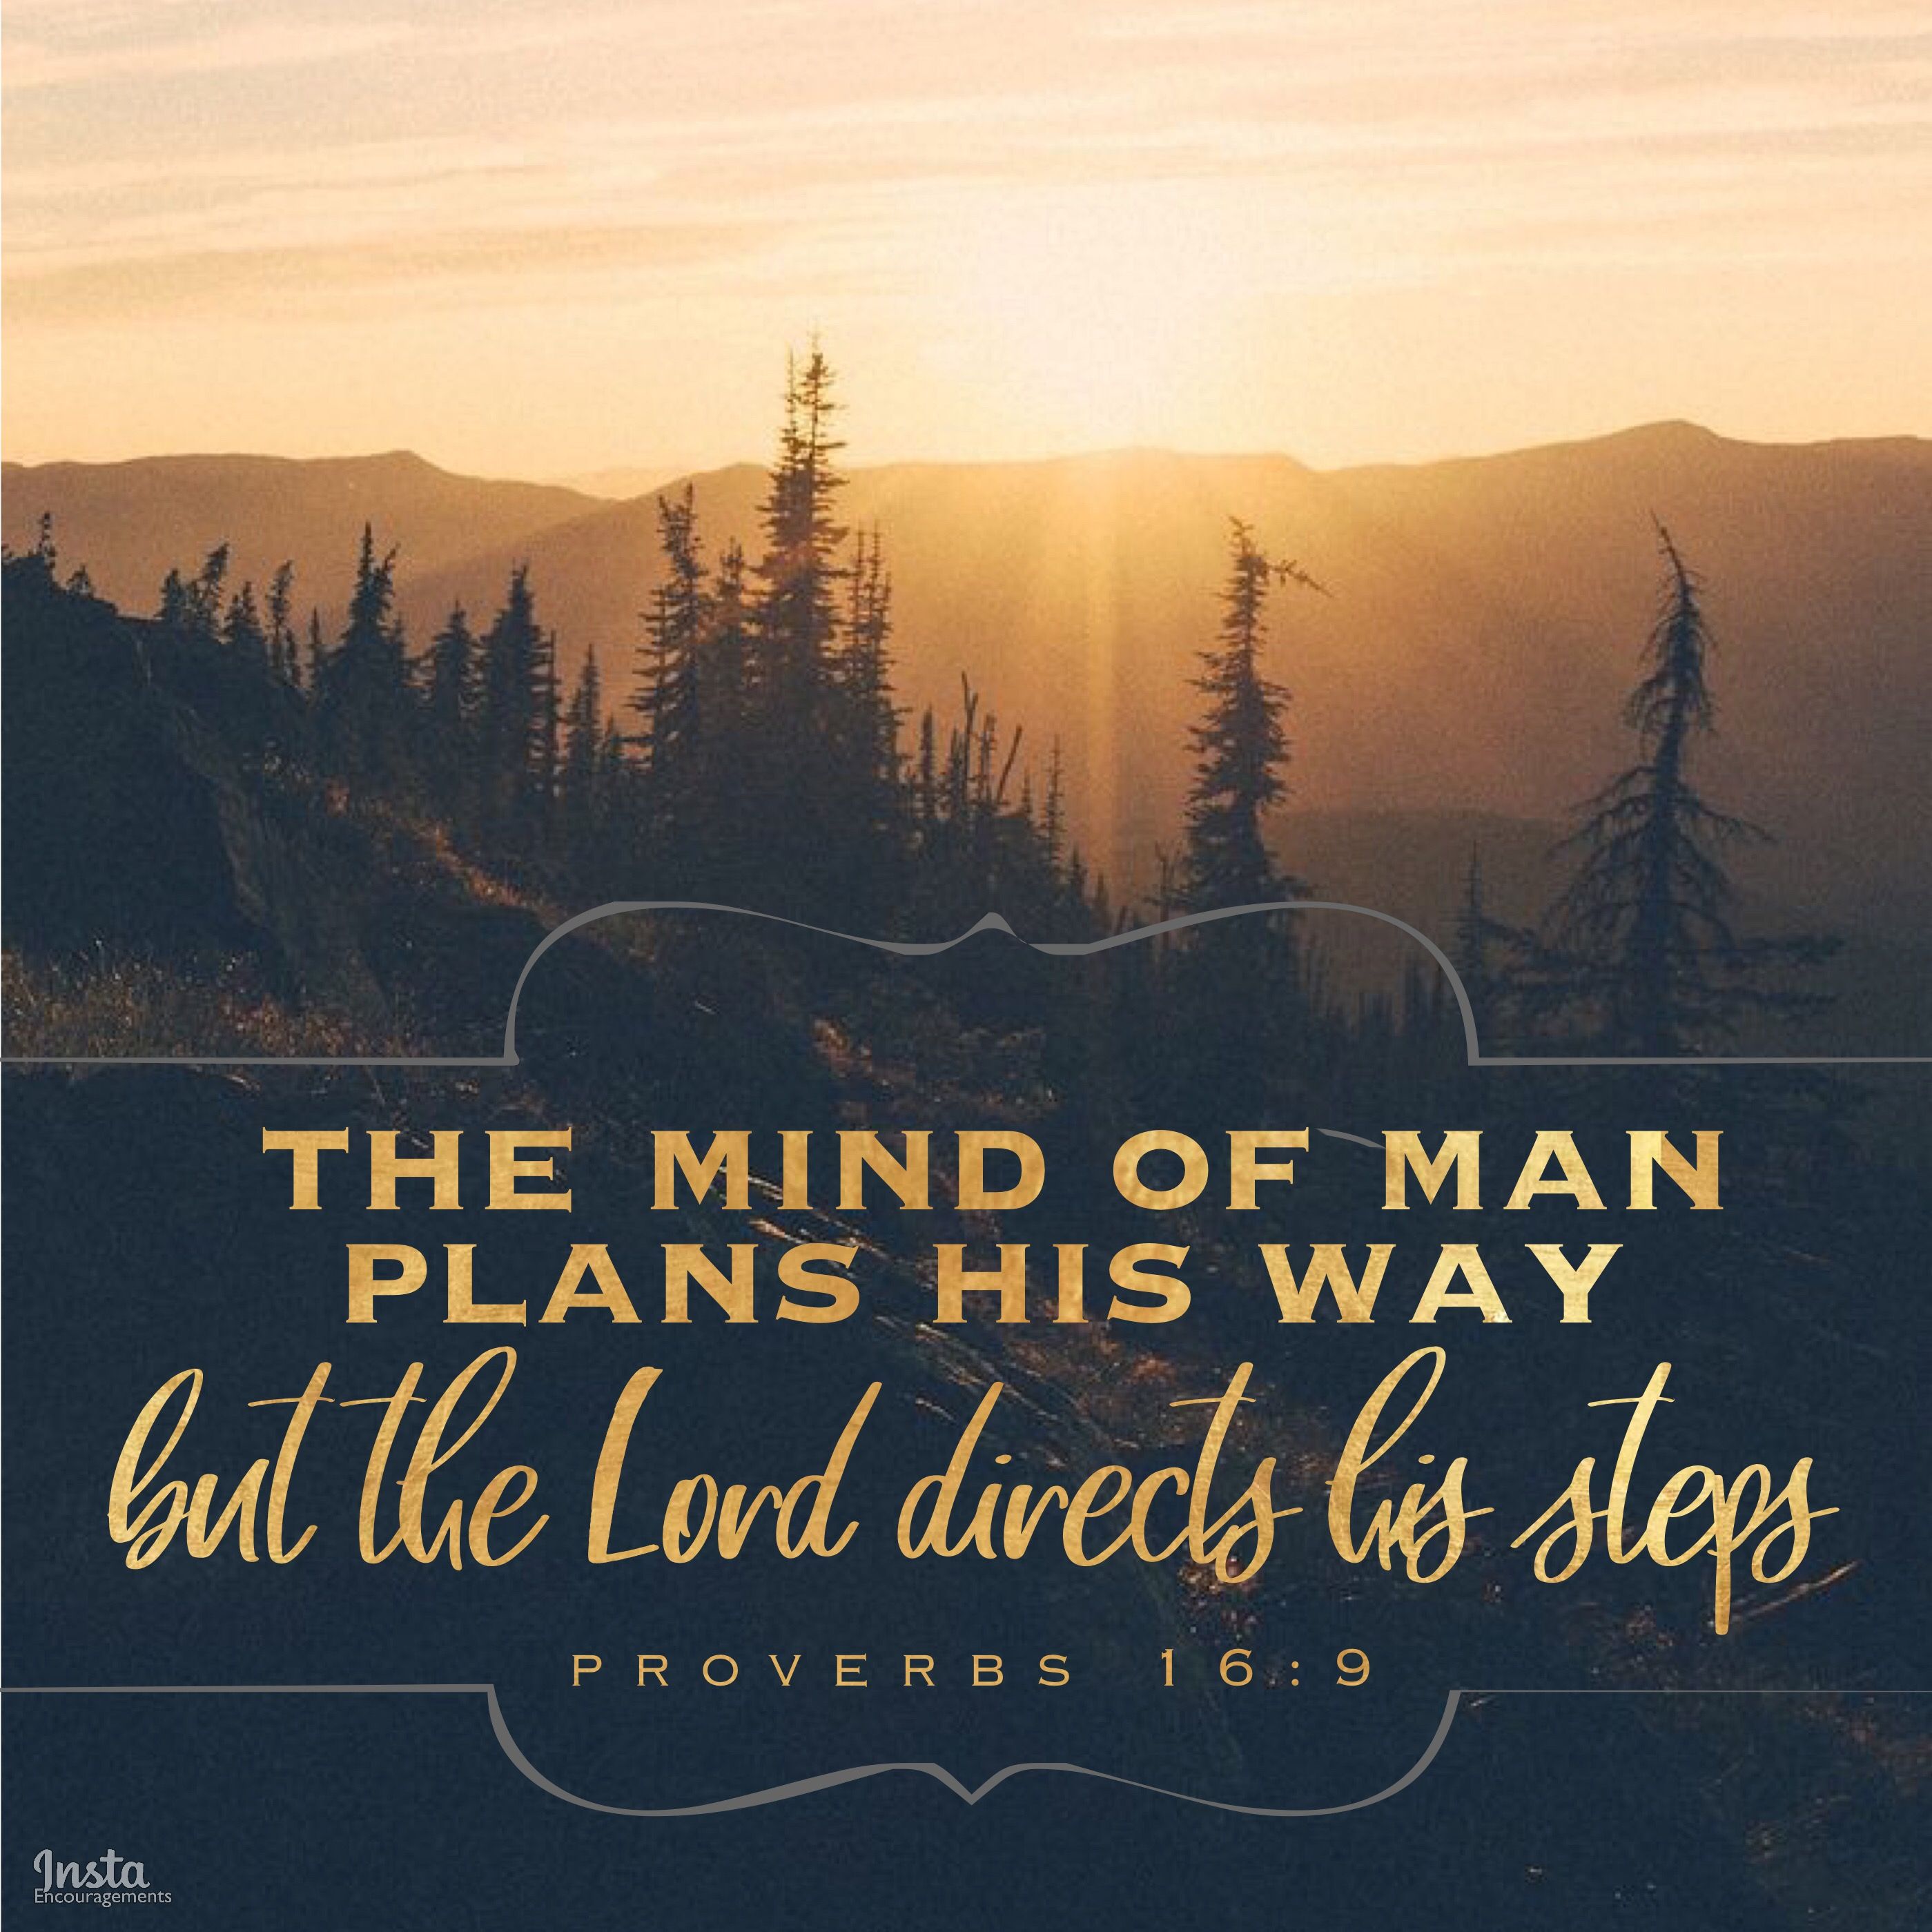 So glad that the Lord directs our steps! “The mind of man plans his ...